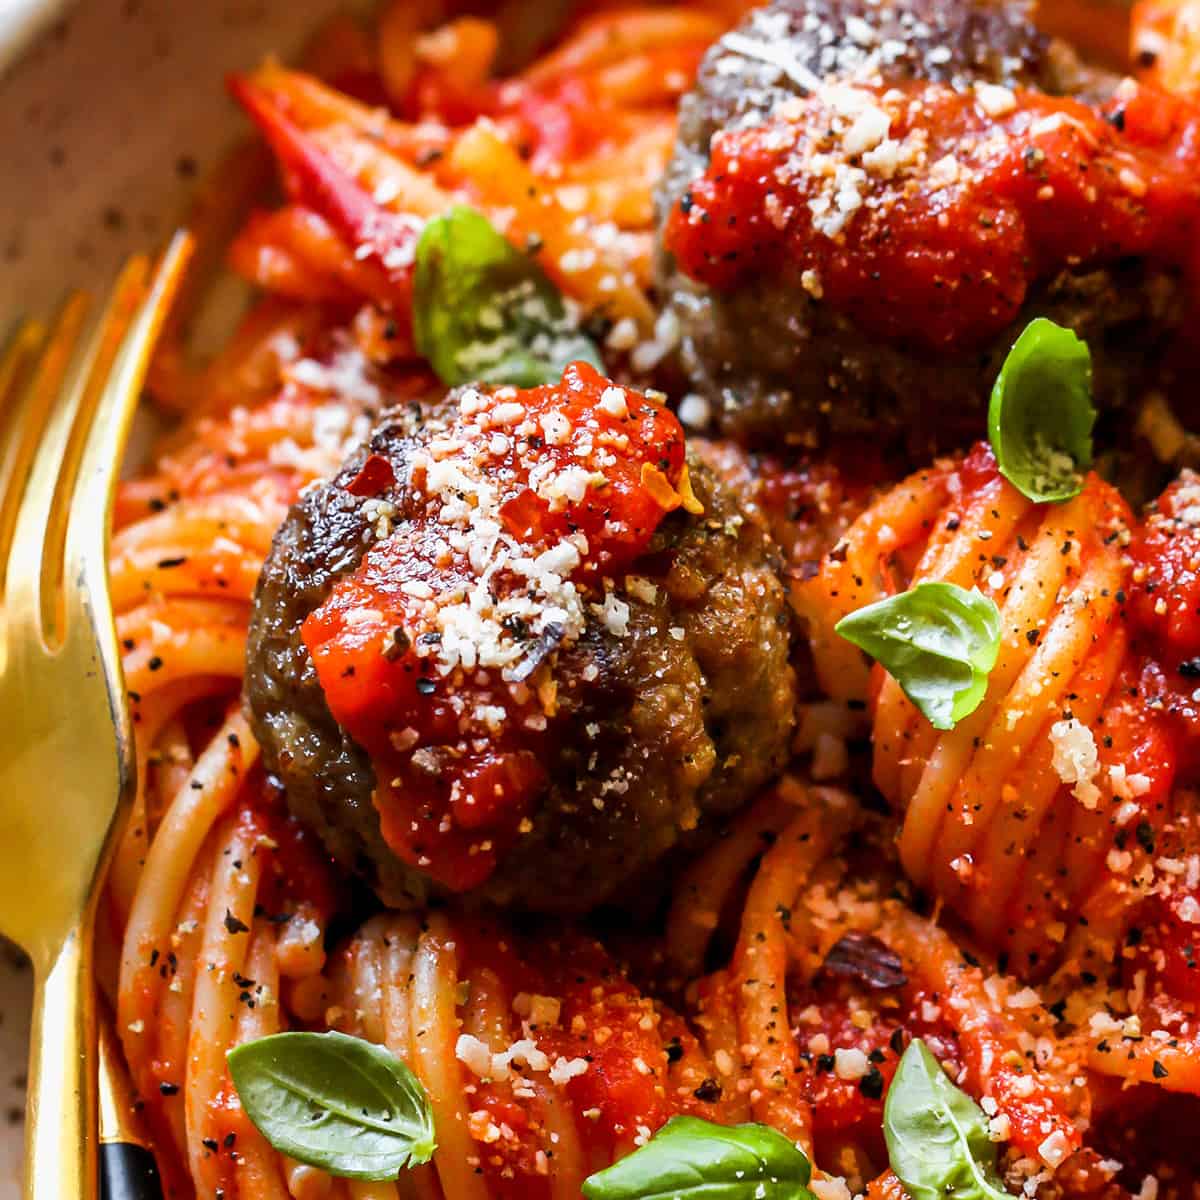 up close view of homemade meatballs over pasta in marinara sauce garnished with basil